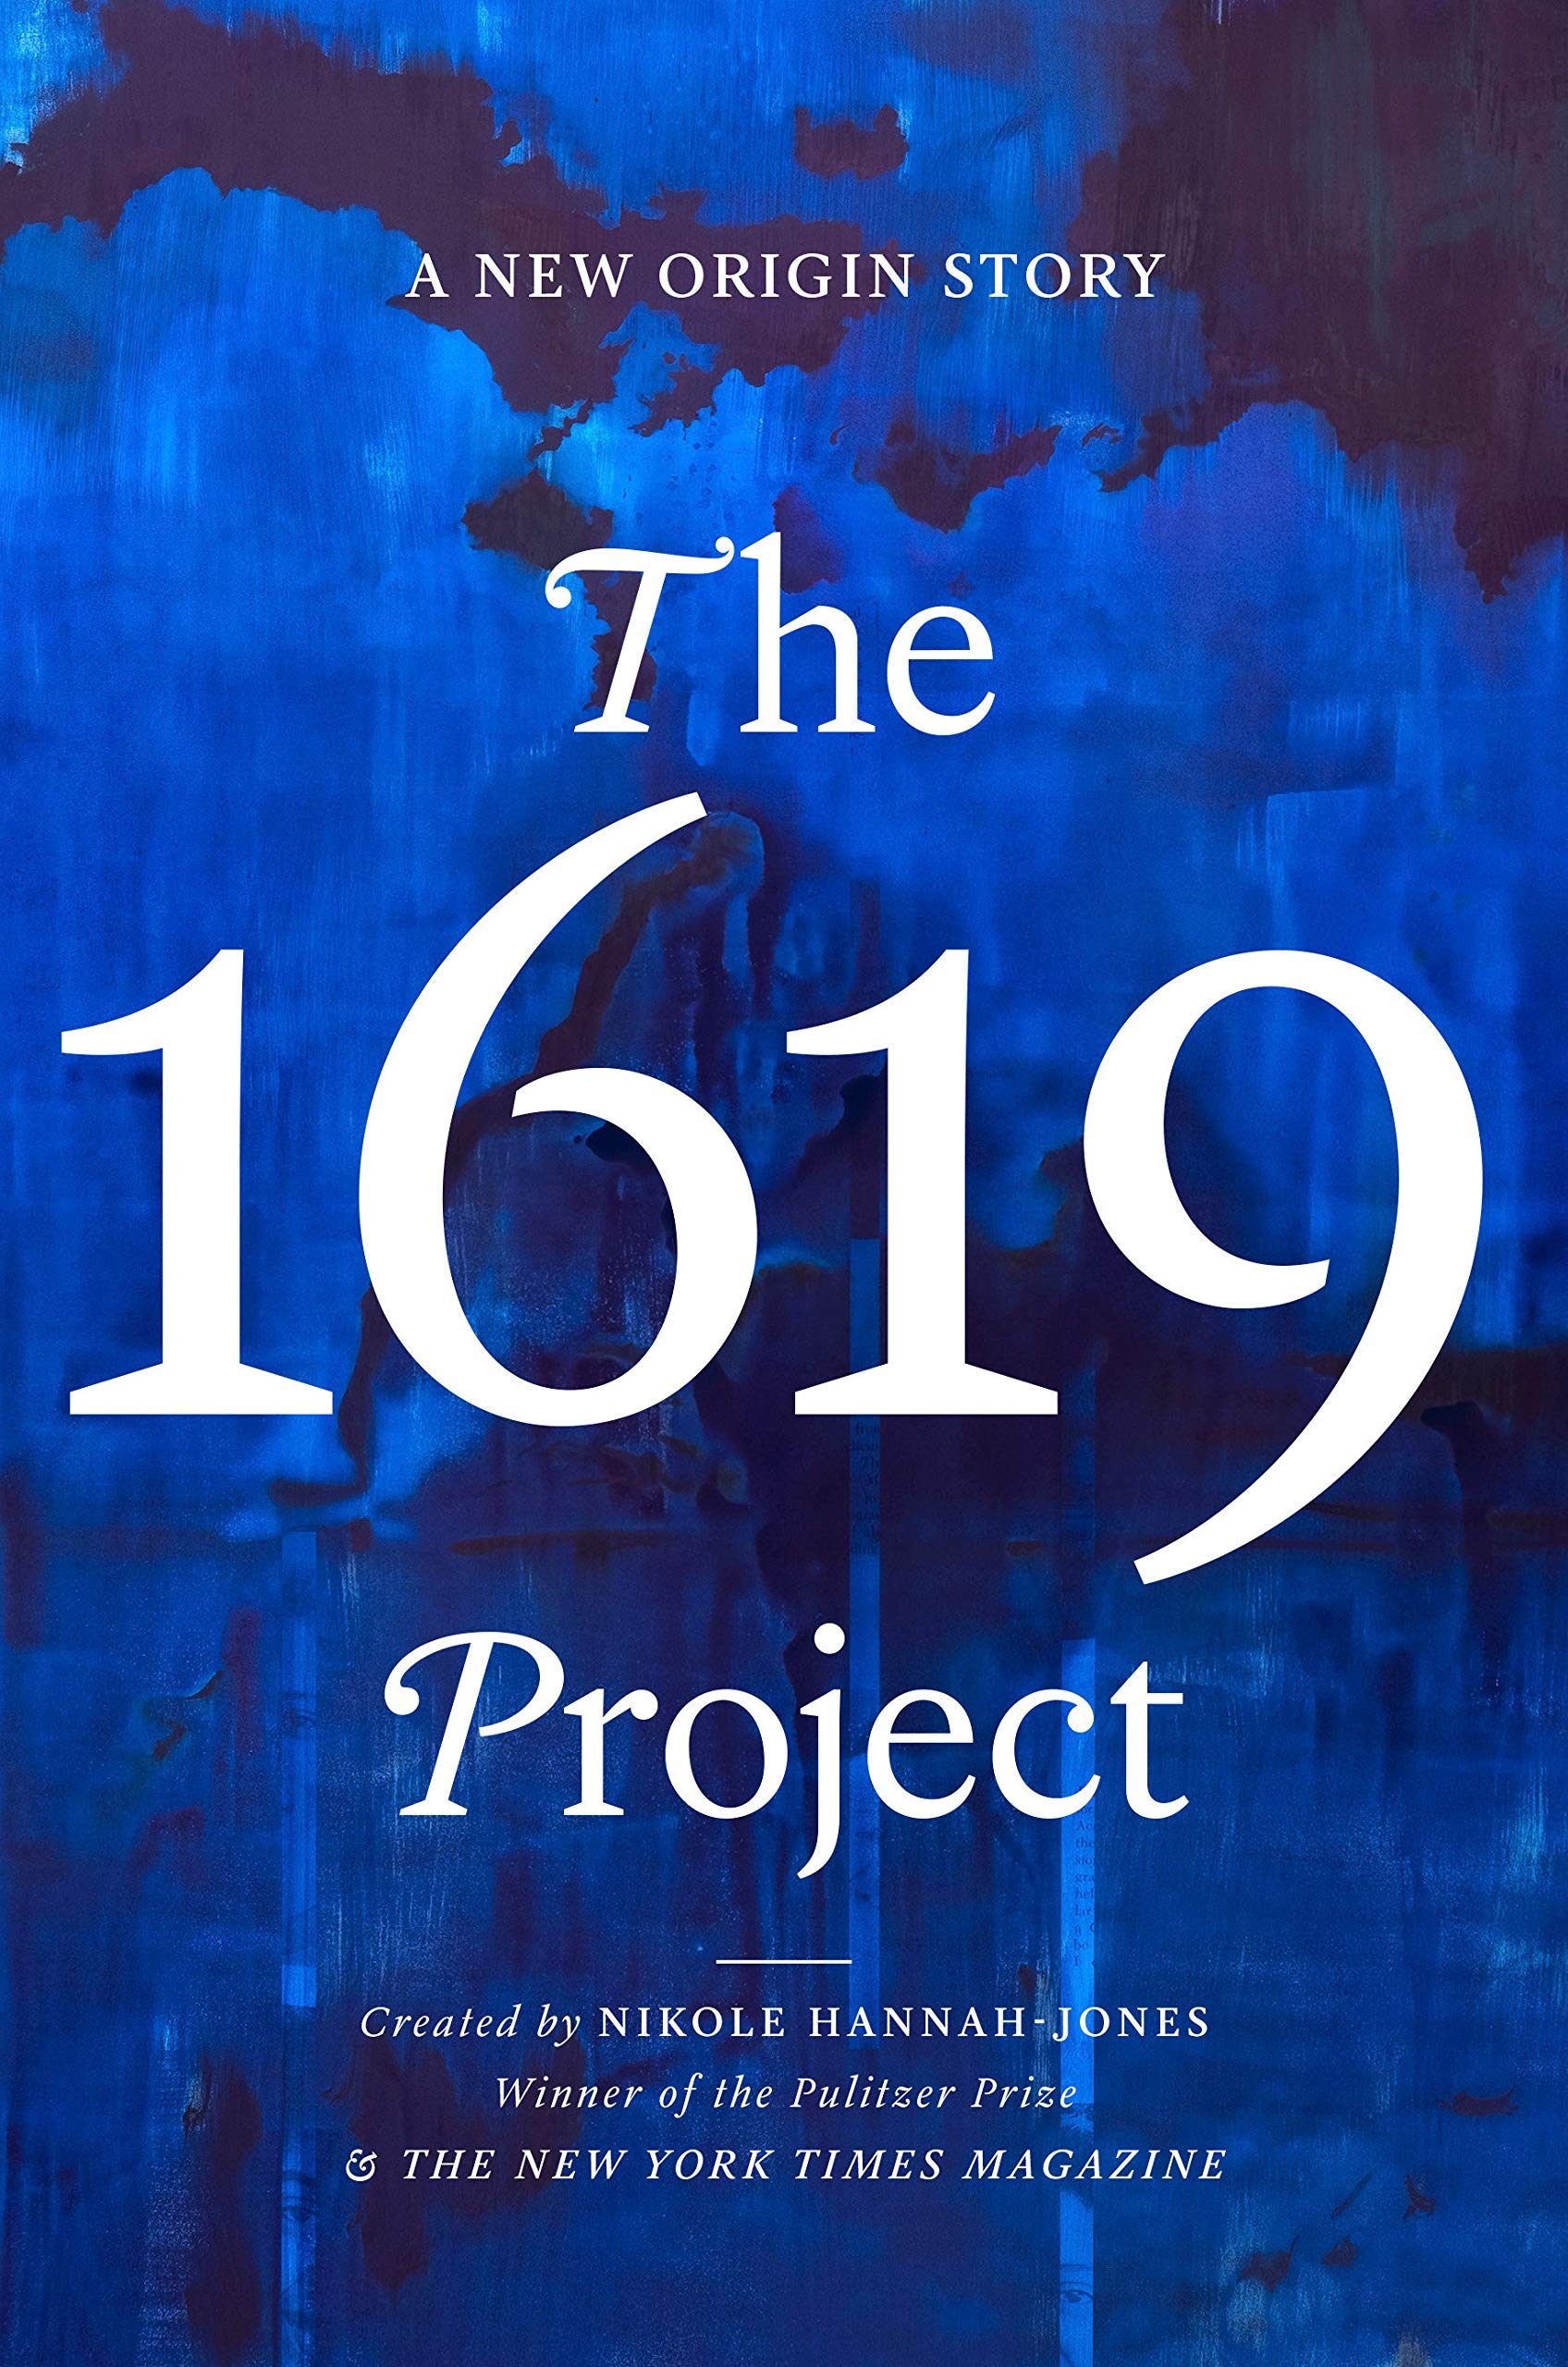 Book cover of "The 1619 Project: A New Origin Story"